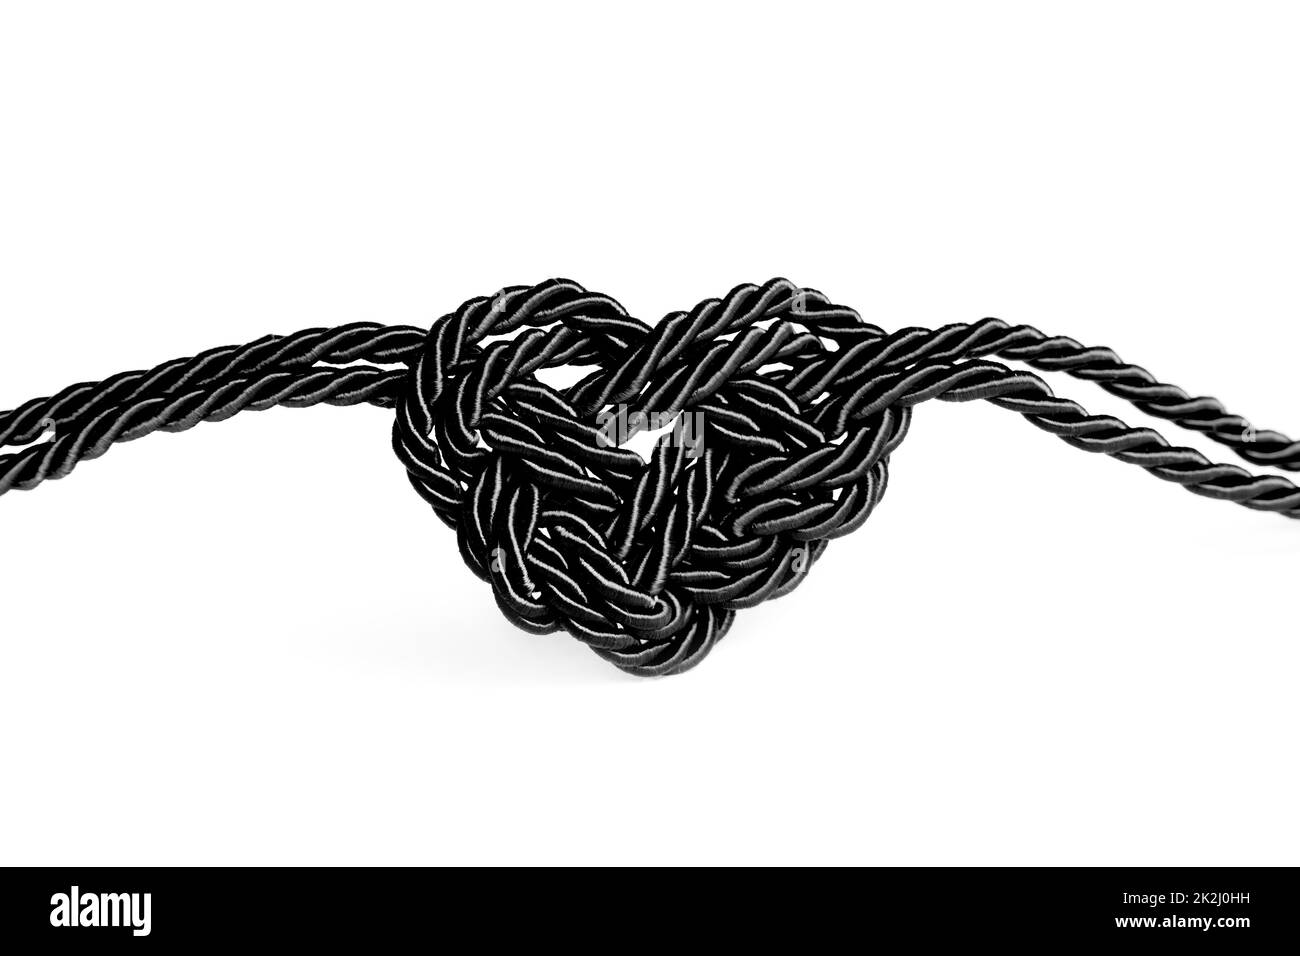 Heart shaped knot made from black braided cords isolated on white background. Mourning and grief concept. Stock Photo